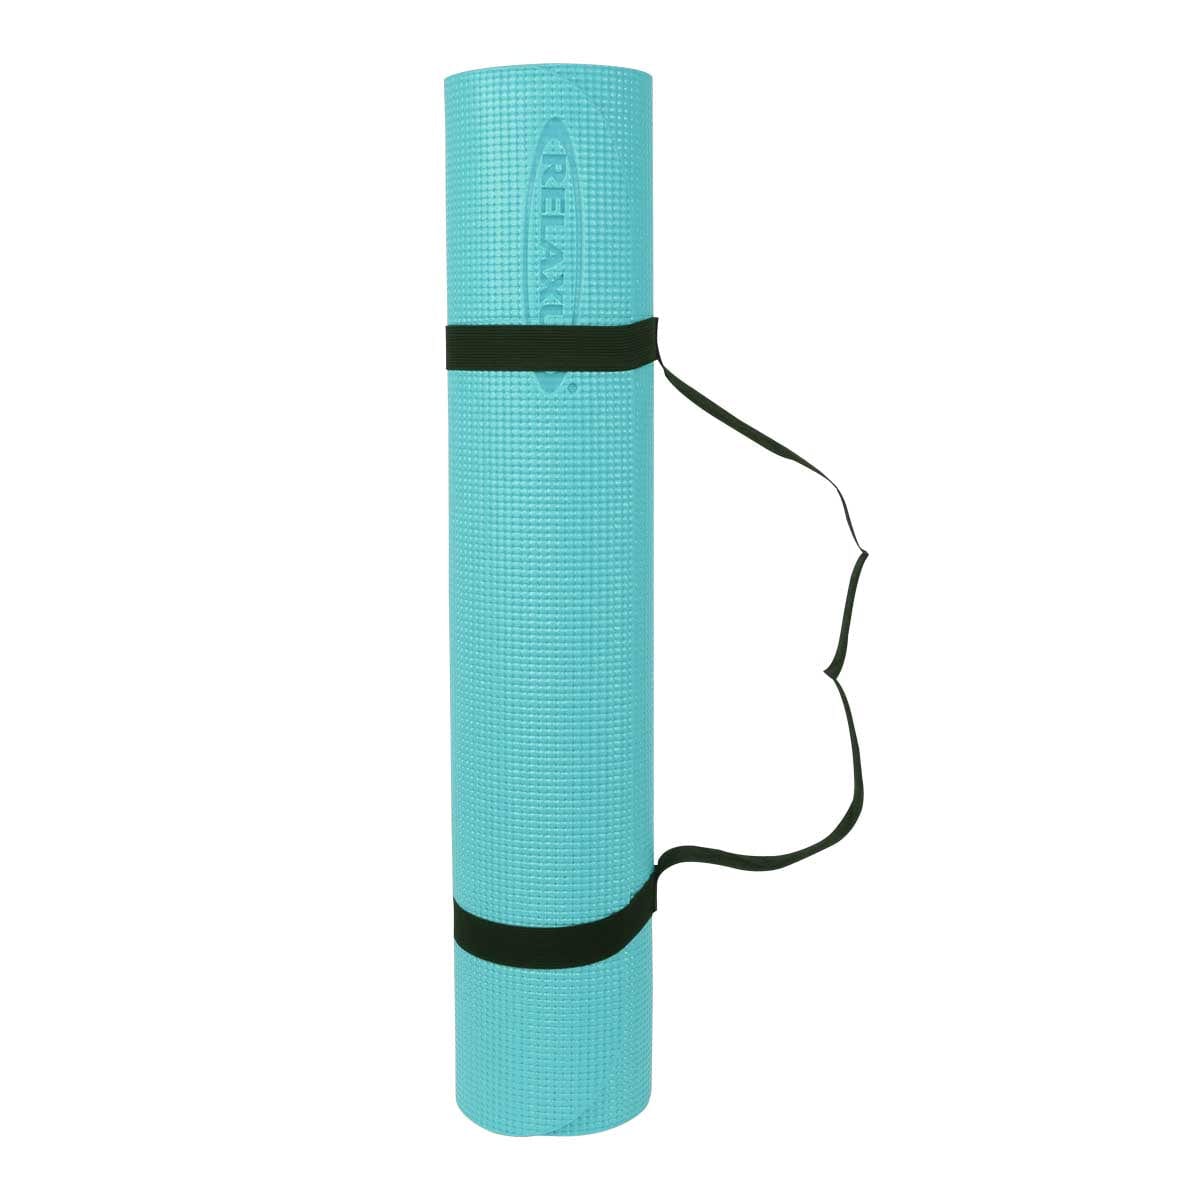 Buy Strauss Blue Pvc , Foam Yoga mat - 1 pc Online at Low Prices in India 